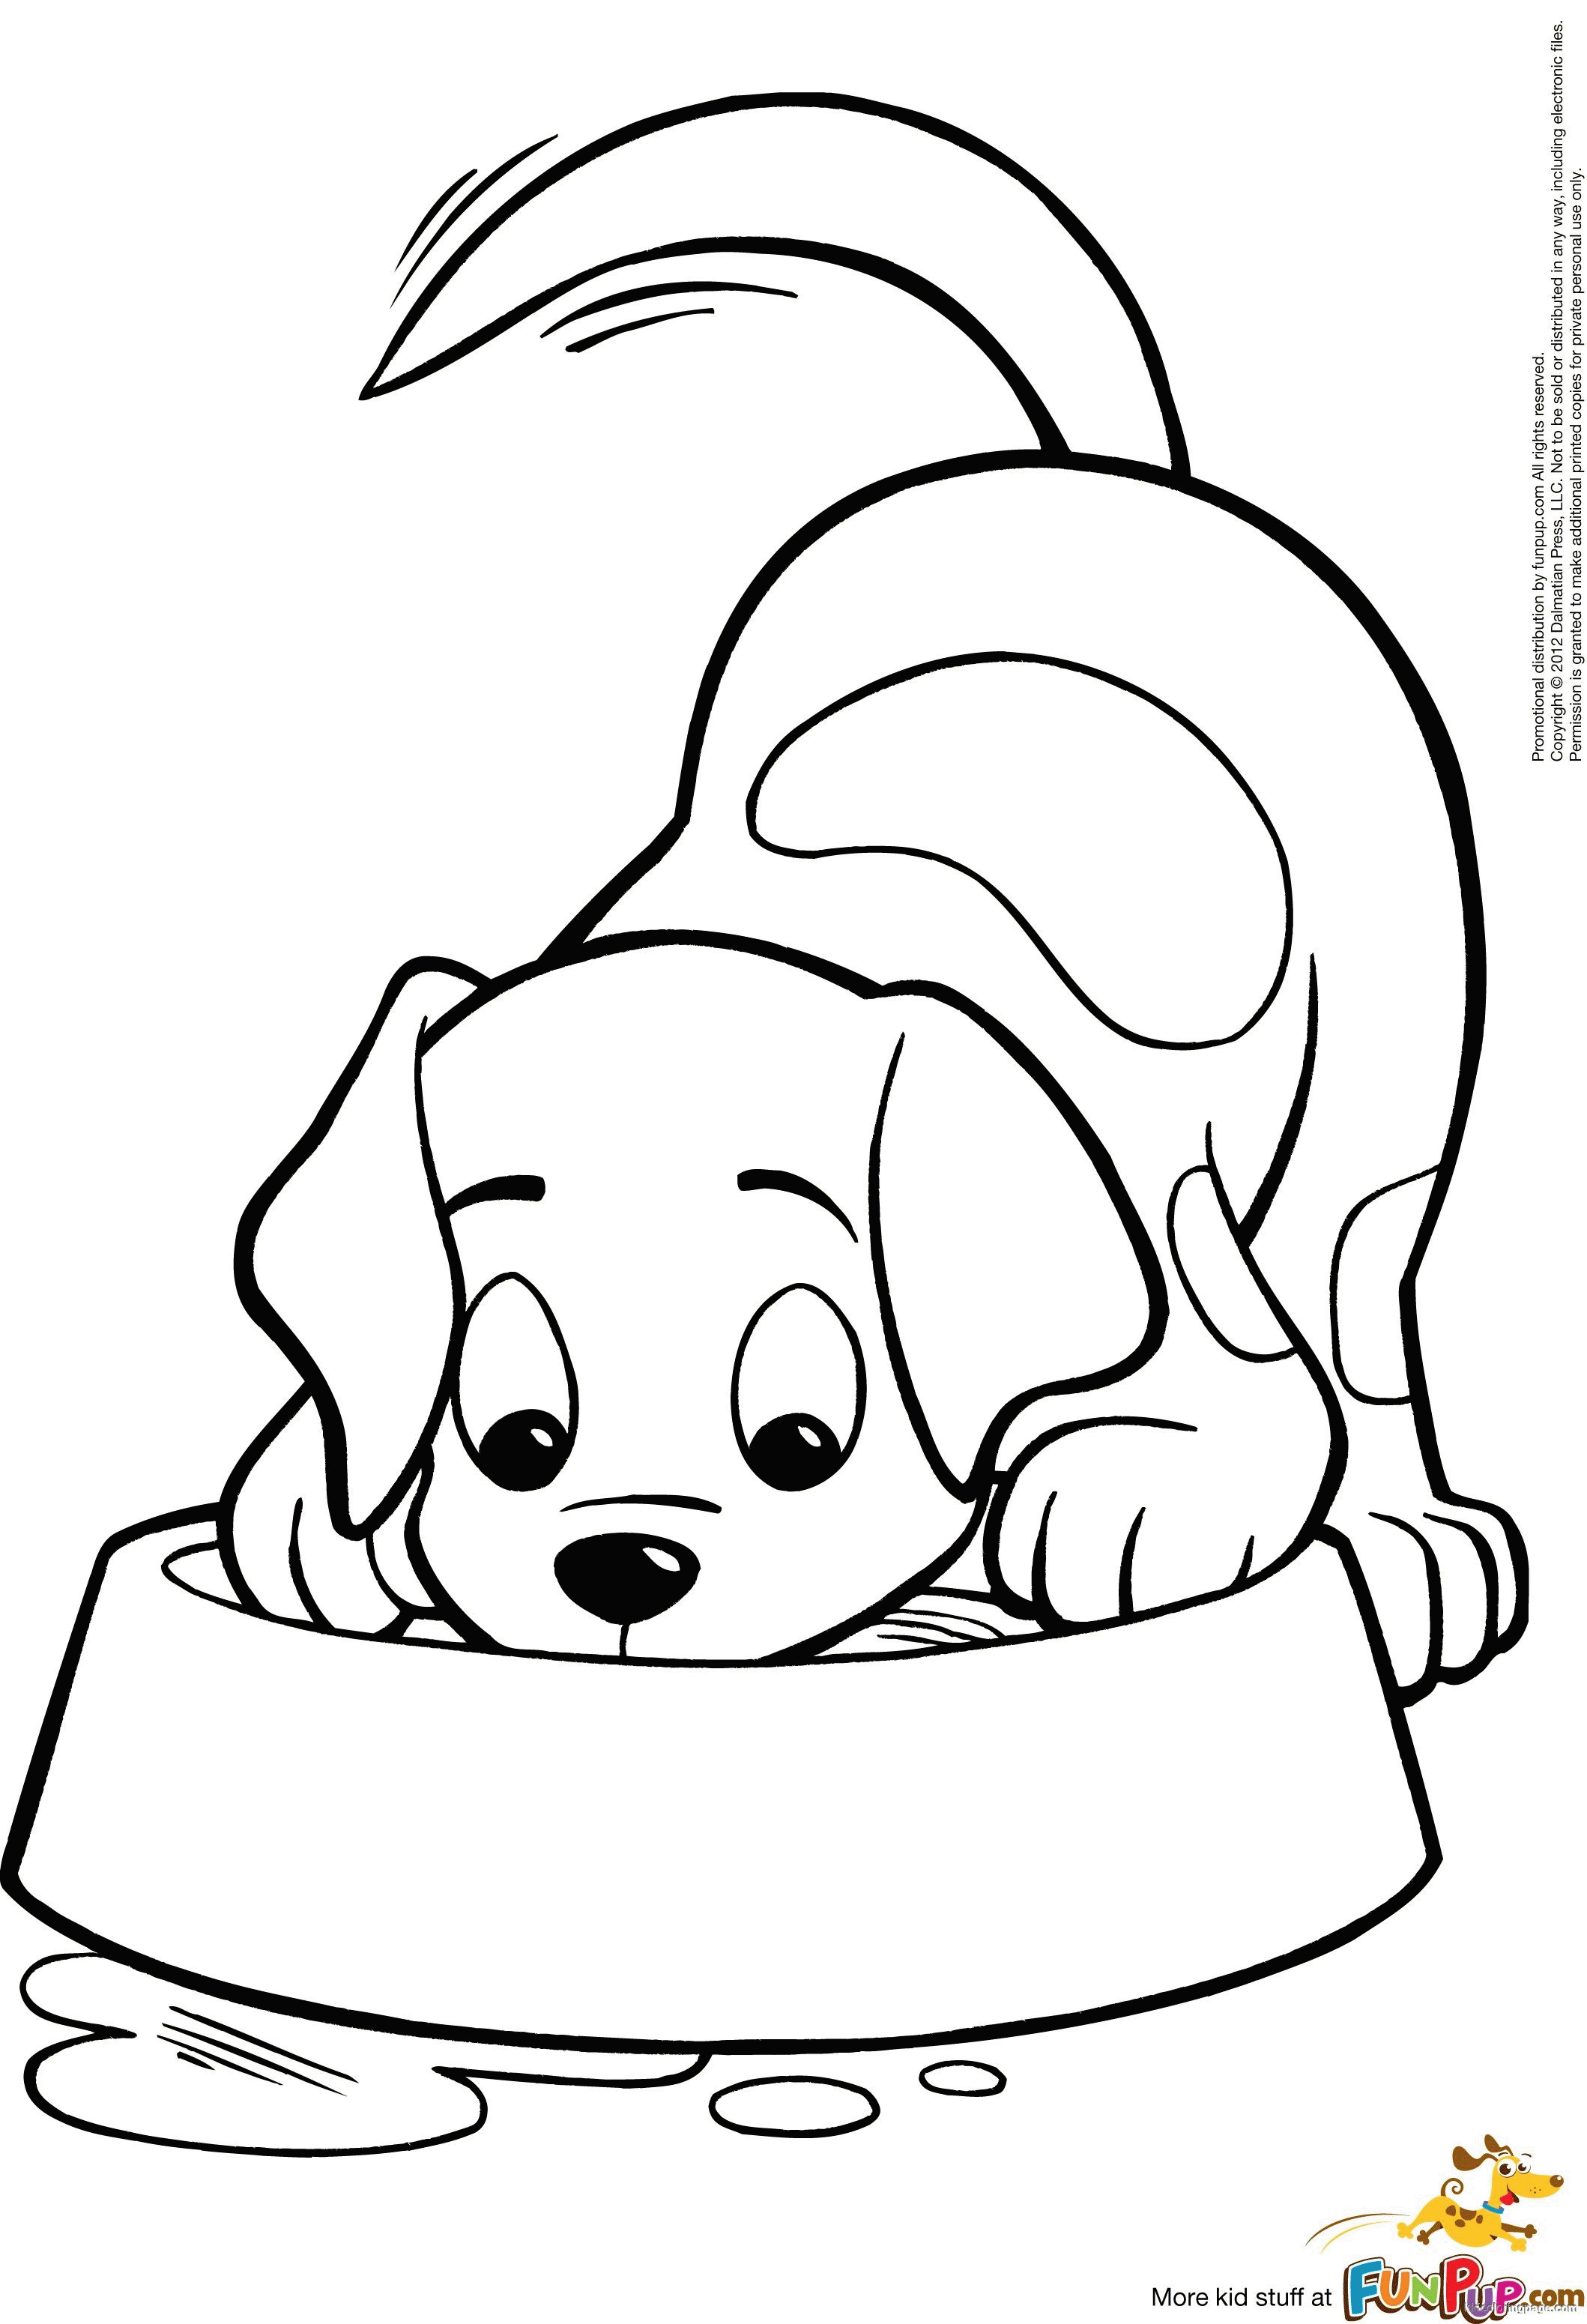 Cute Puppy Coloring Pages To Print | Free Coloring Pages Printable